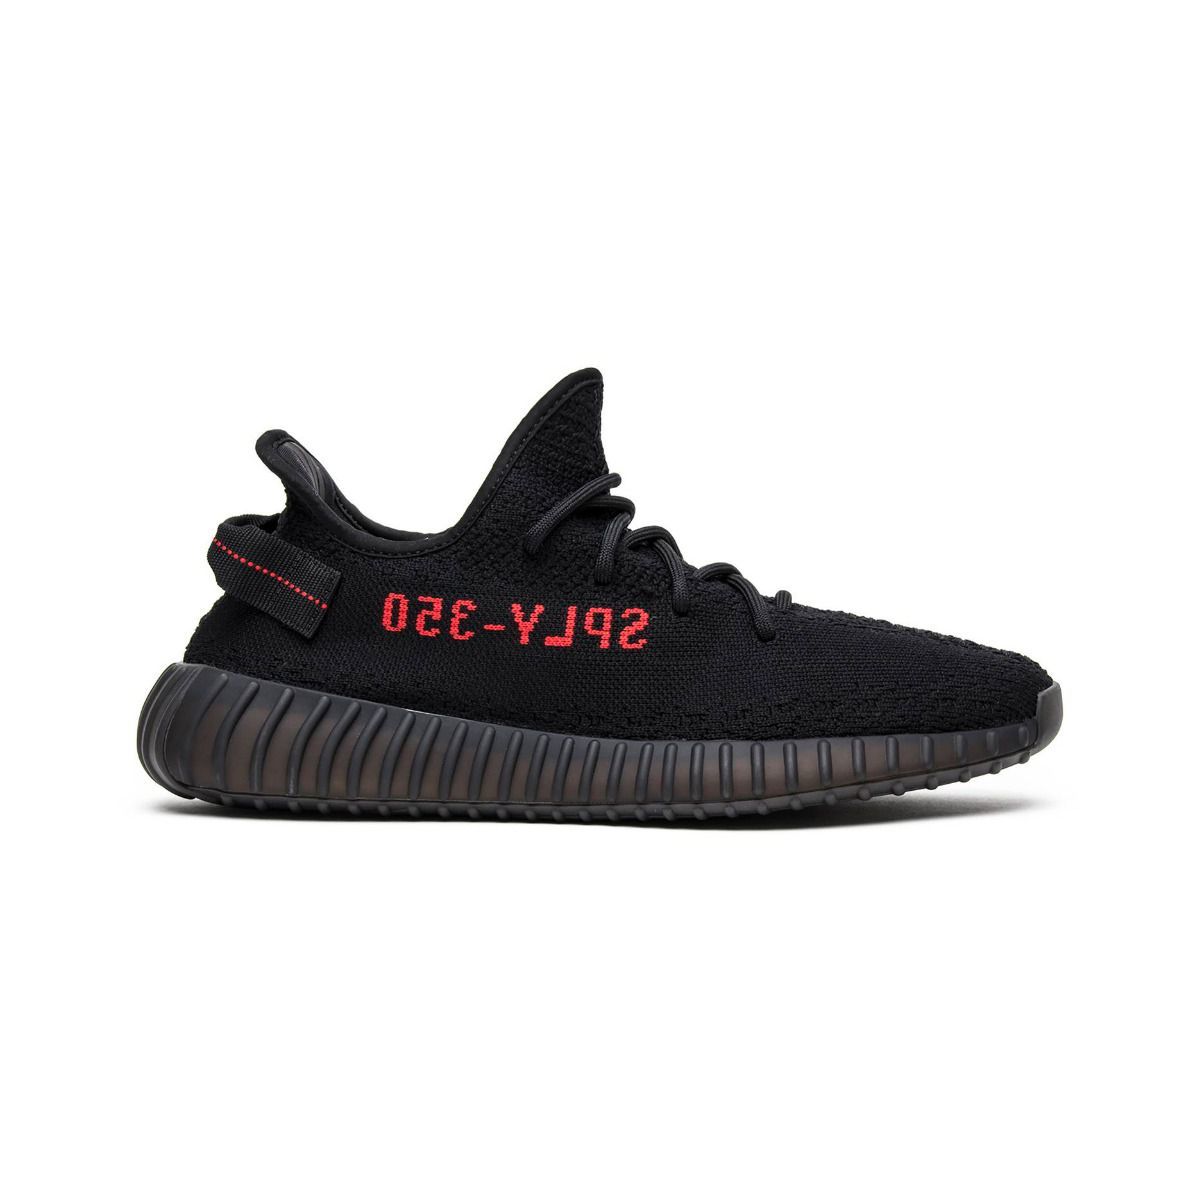 Cheap Yeezy 350 Boost V2 Shoes Aaa Quality023